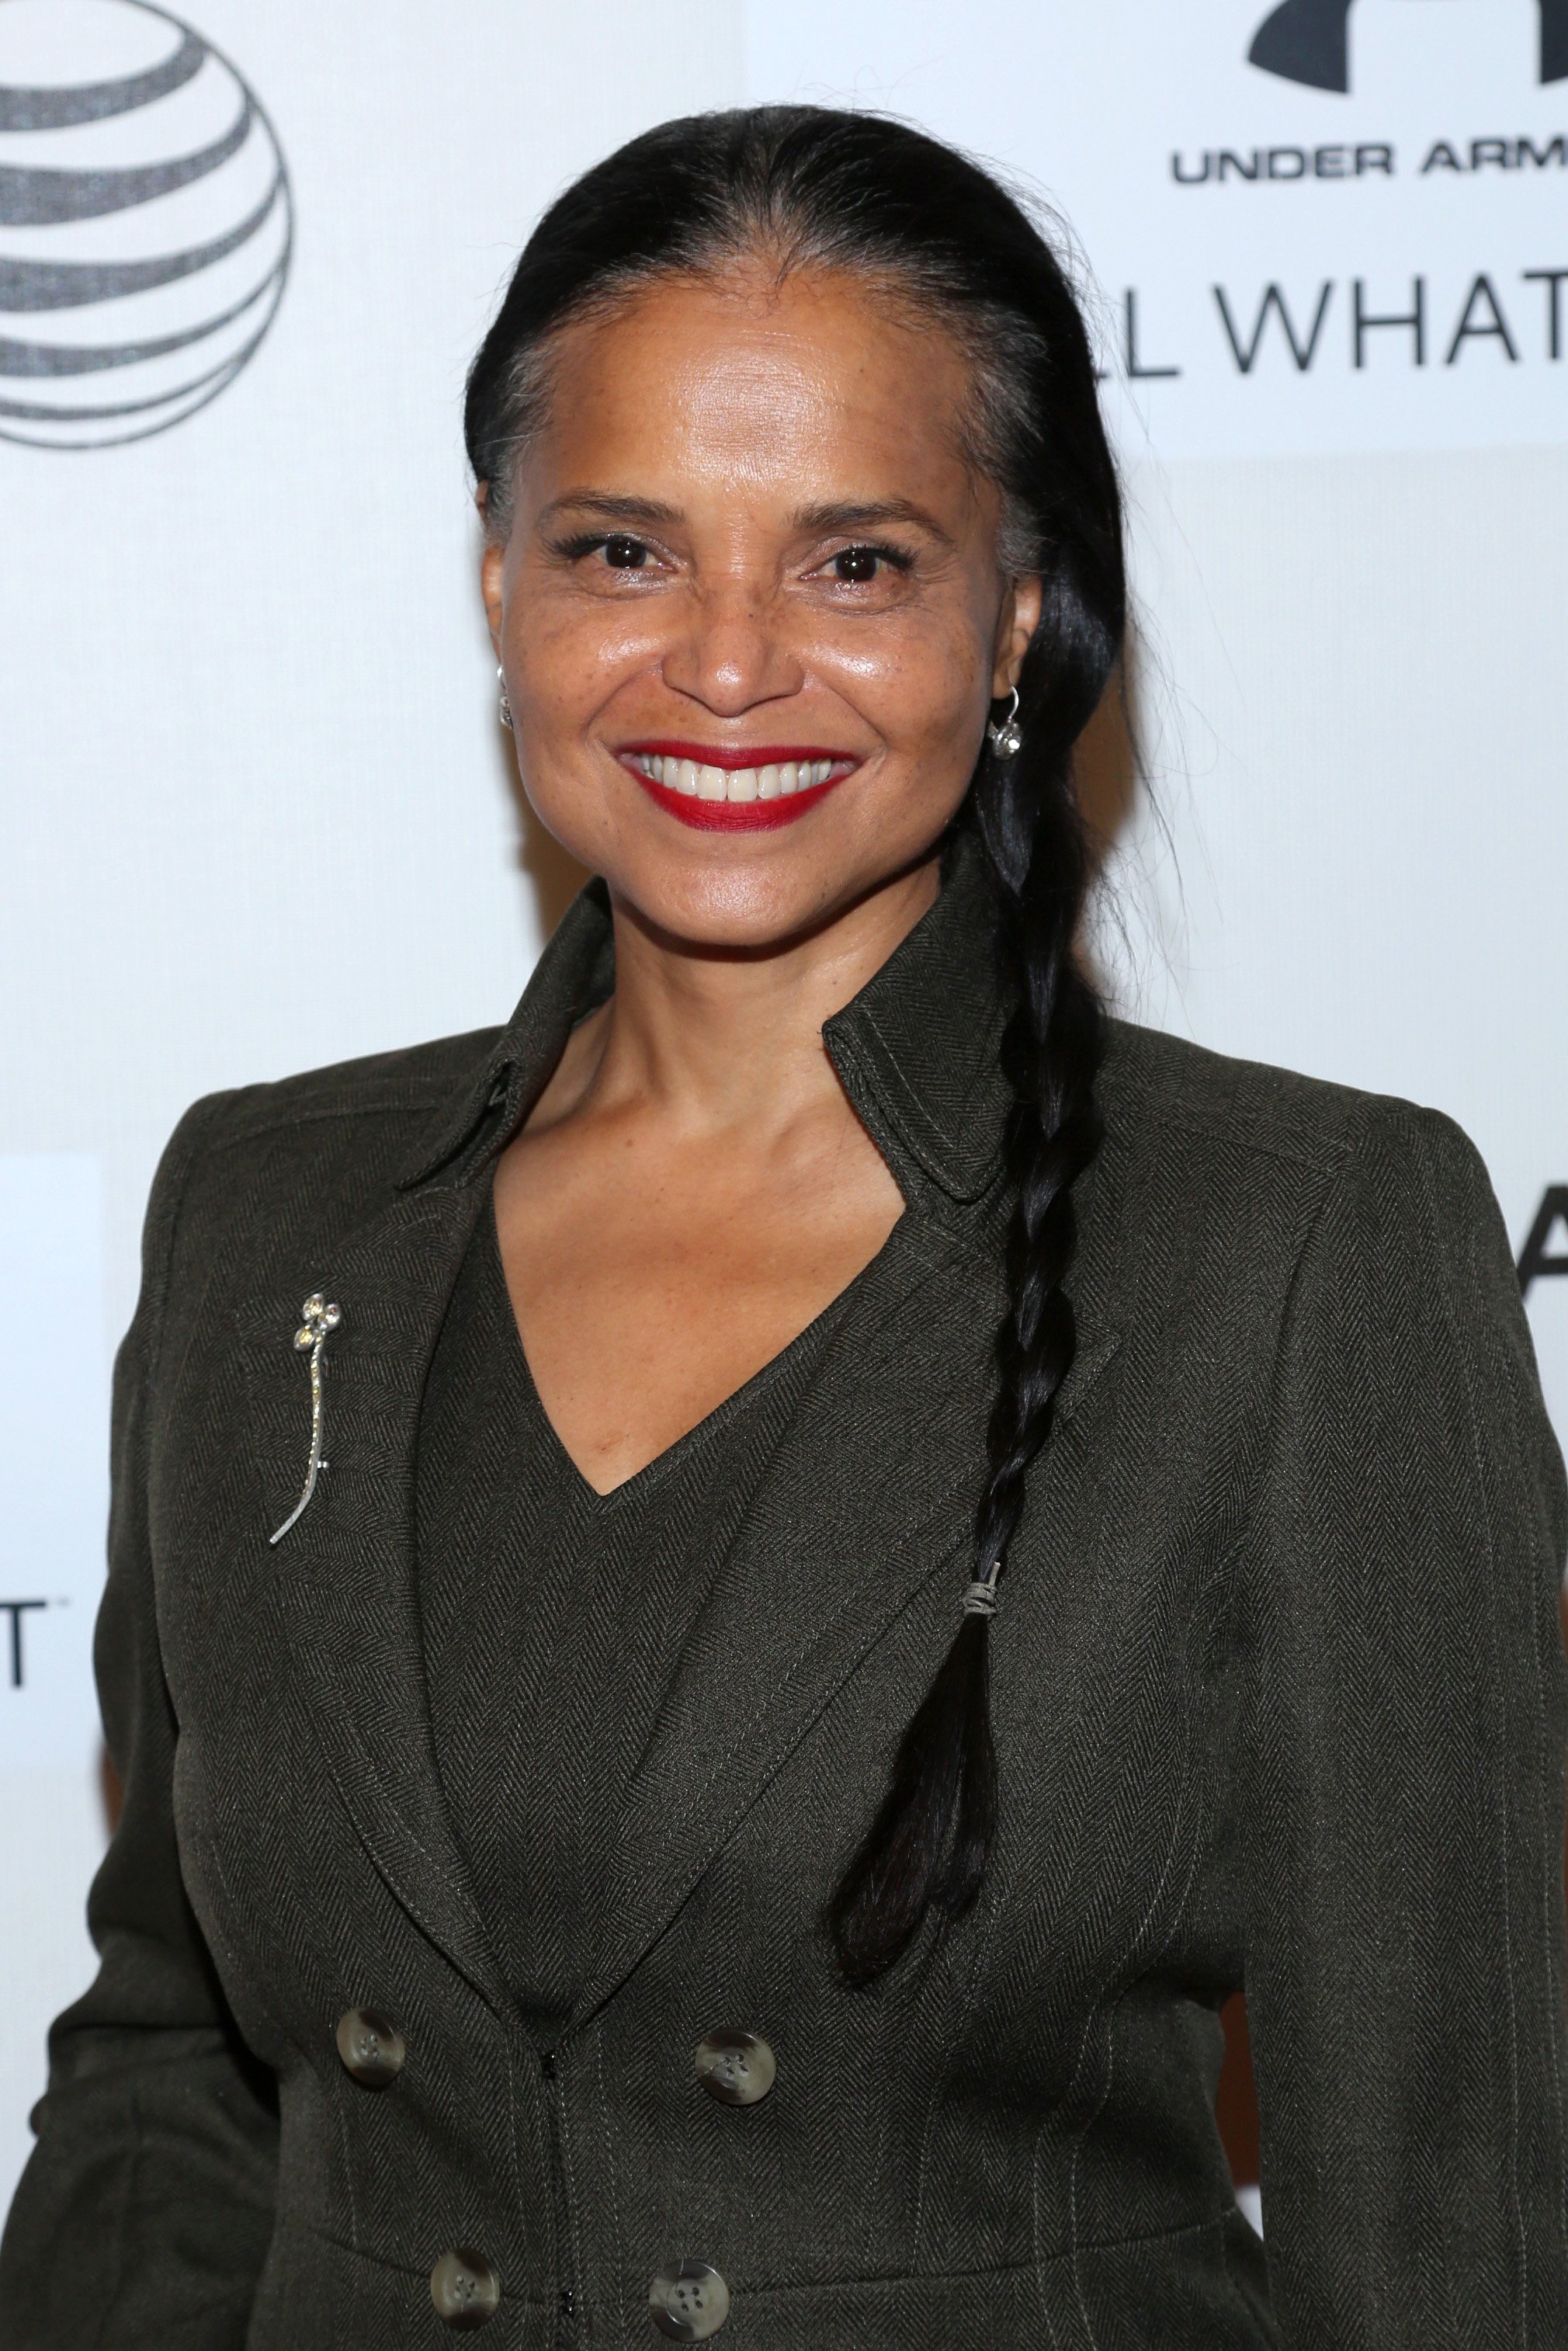 Victoria Rowell attends the premiere of "A Ballerina's Tale" during the 2015 Tribeca Film Festival at BMCC Tribeca PAC on April 19, 2015 | Photo: GettyImages